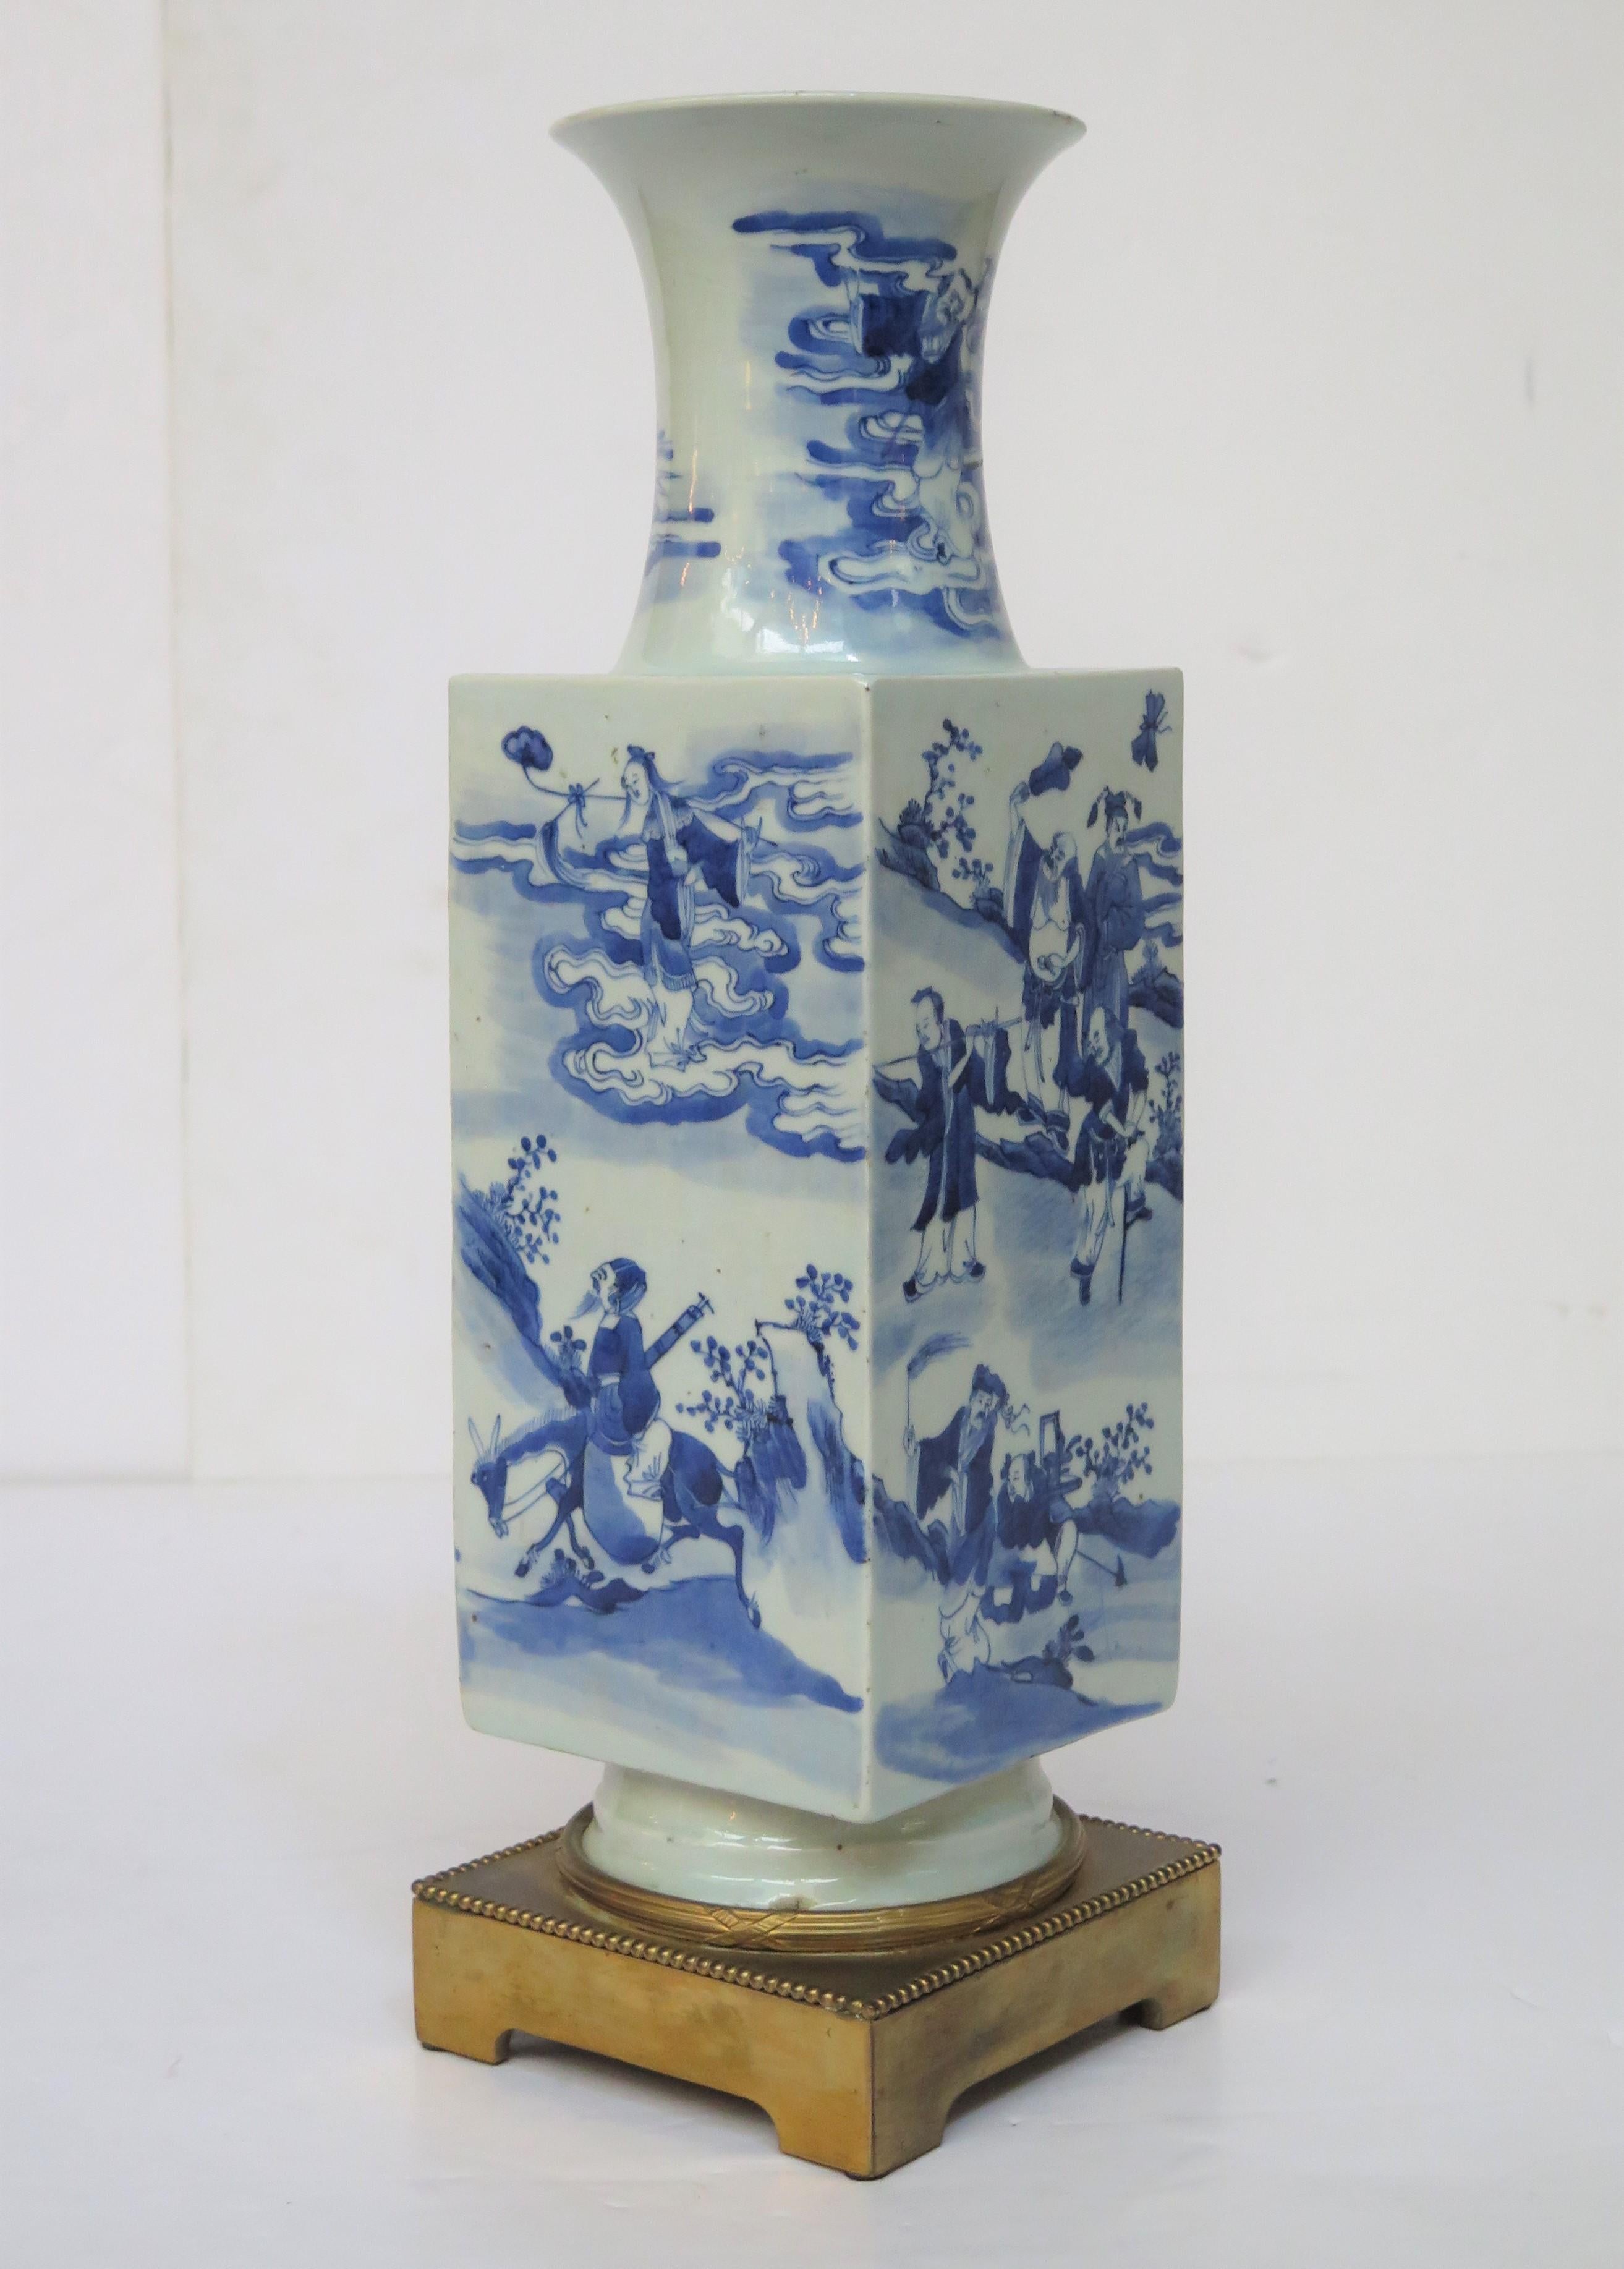 Chinese Export Qing Dynasty Blue and White Porcelain Vase in French Gilt Bronze Mount For Sale